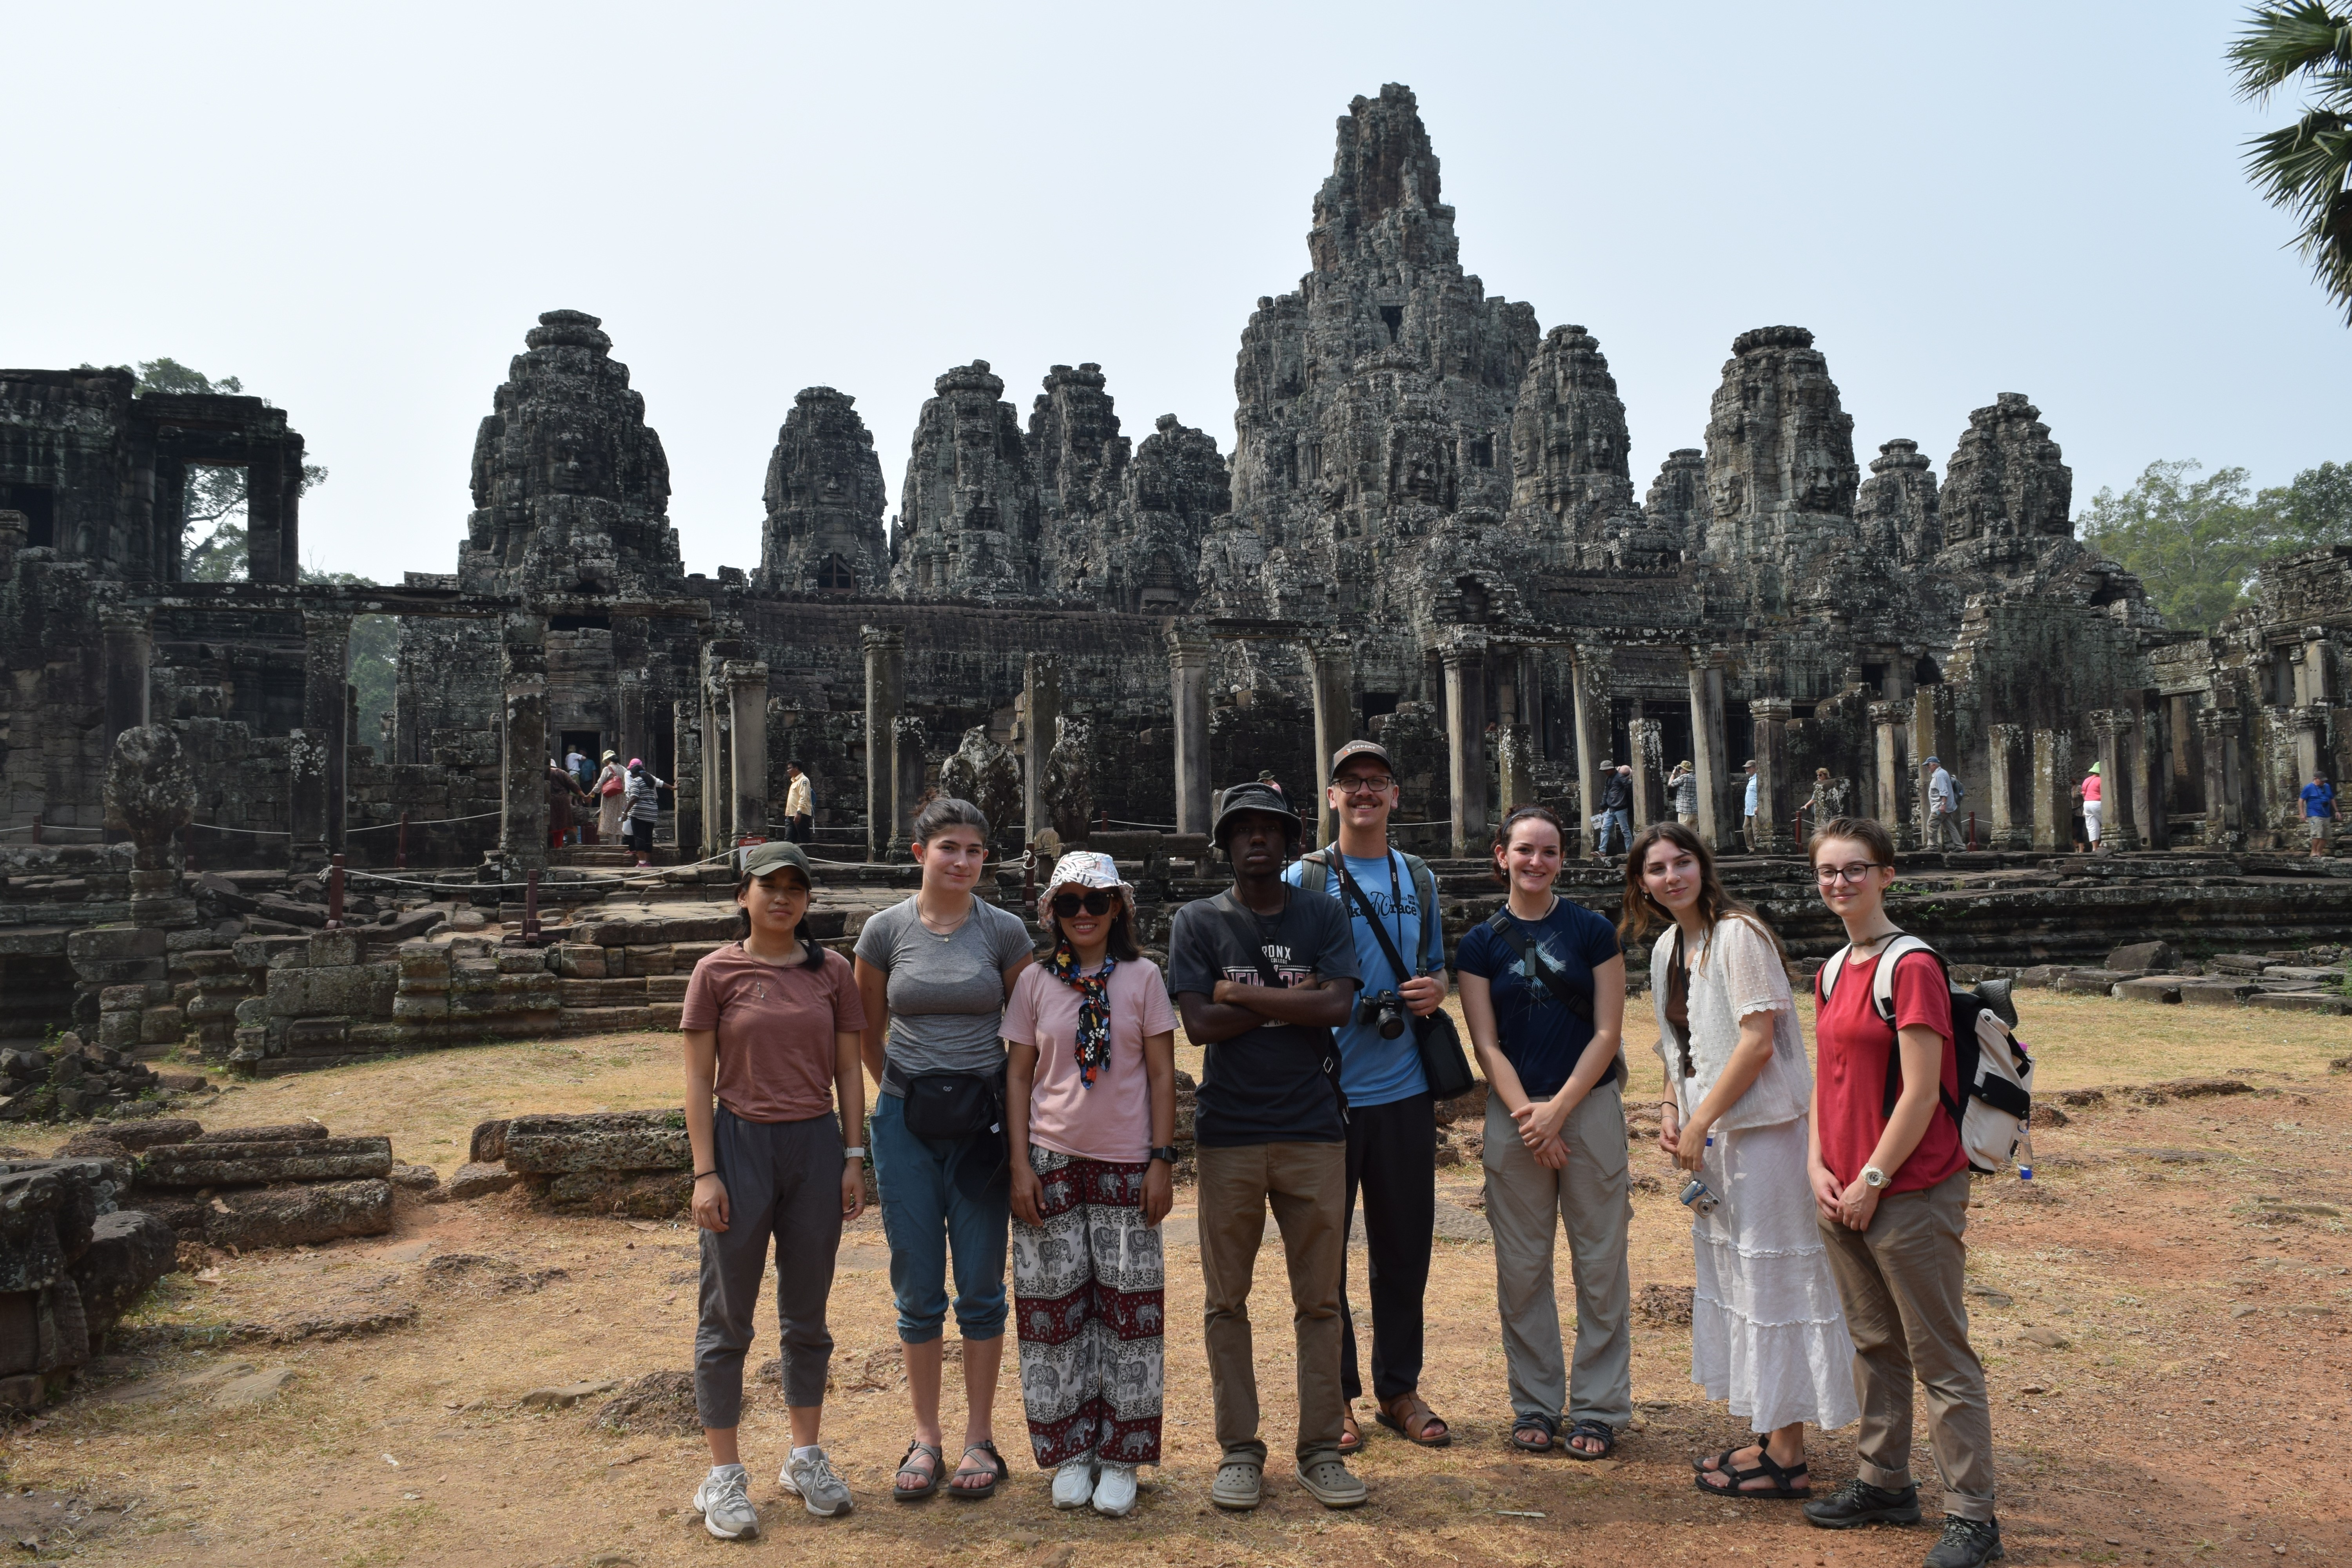 Eight young people standing in front of an ancient building